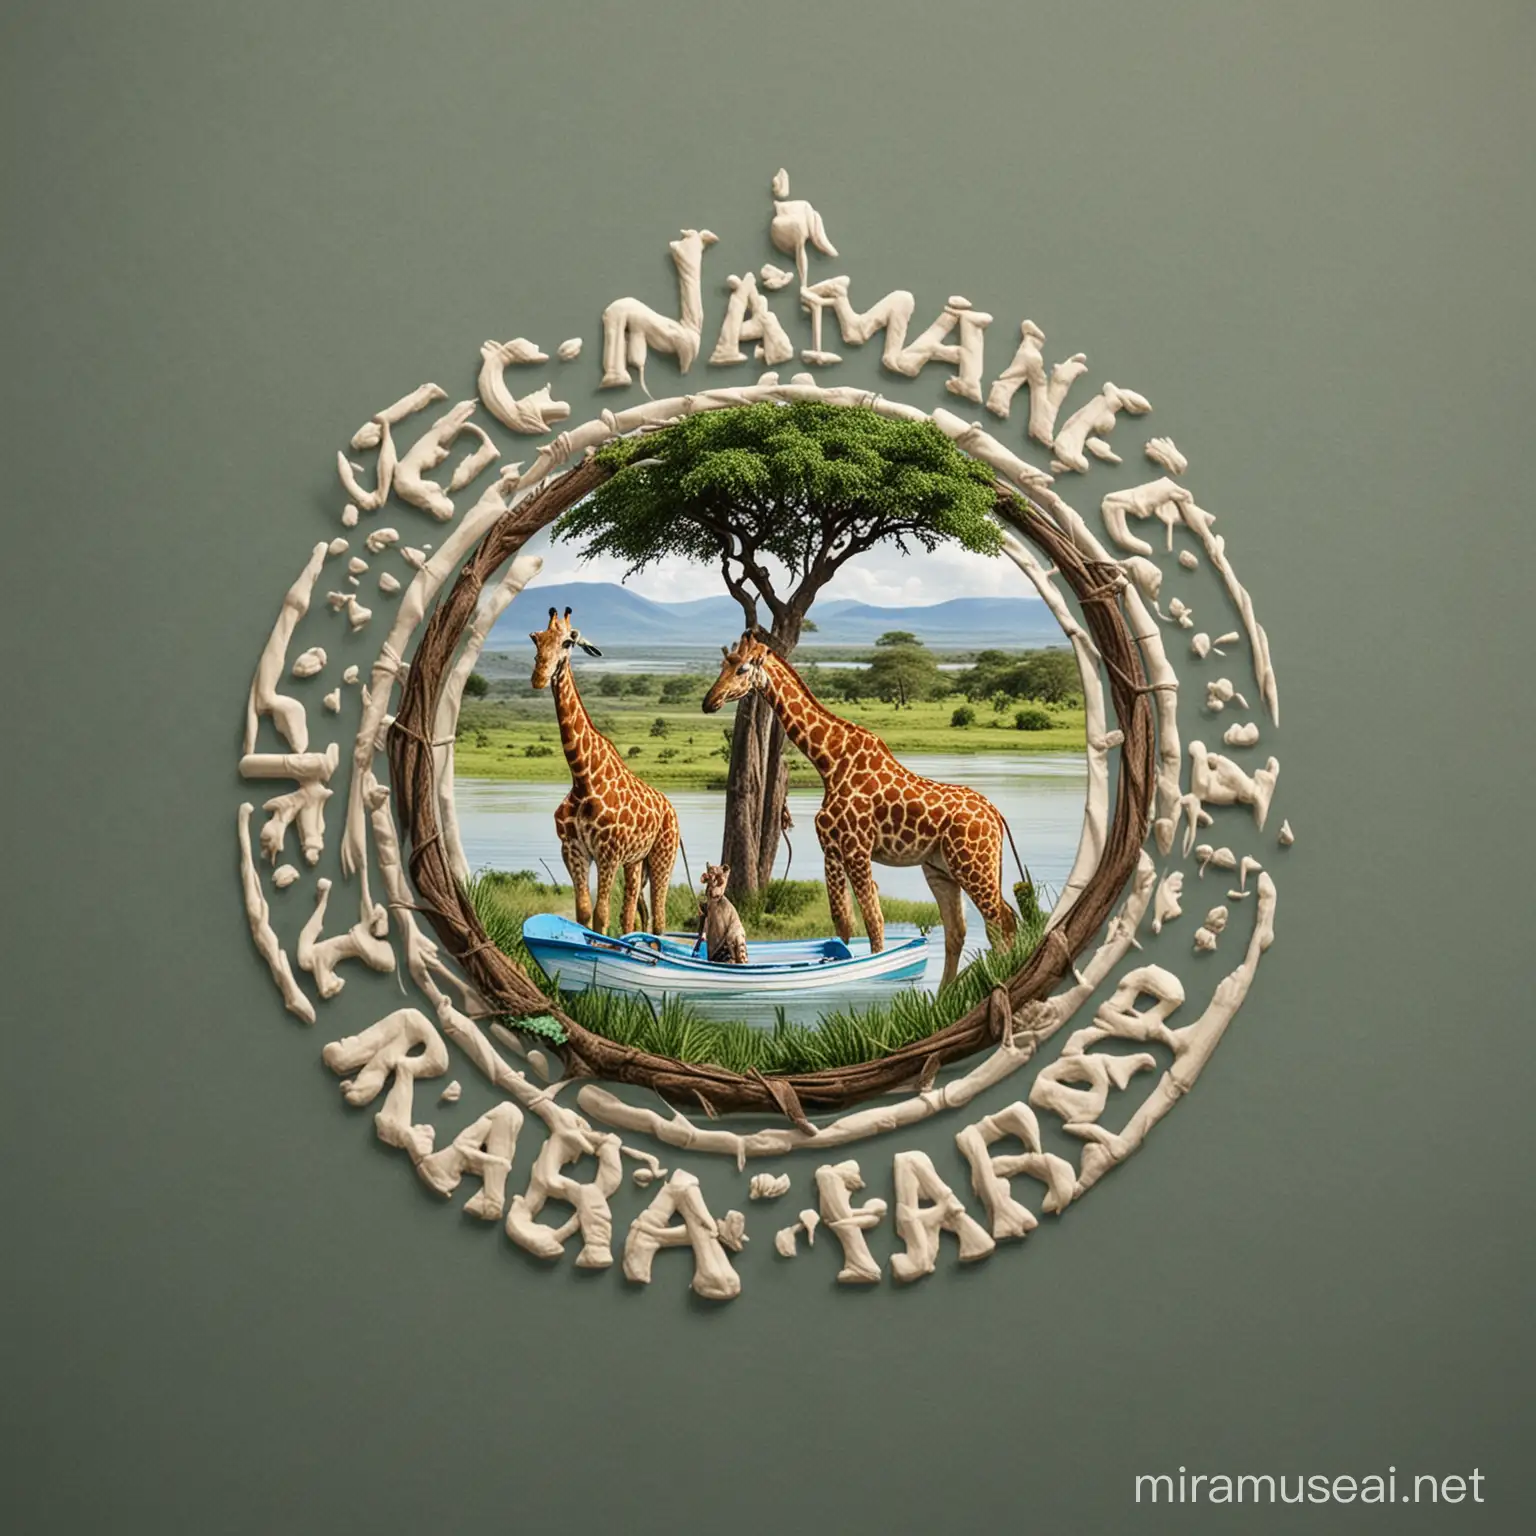 imagine/ a symbol a round logo of eco-safaris that will have an acacia tree a giraffe eating its leaves and it beside a lake hippo opening it mouse wide in kenyan setup name i s lake naivasha boat riders

